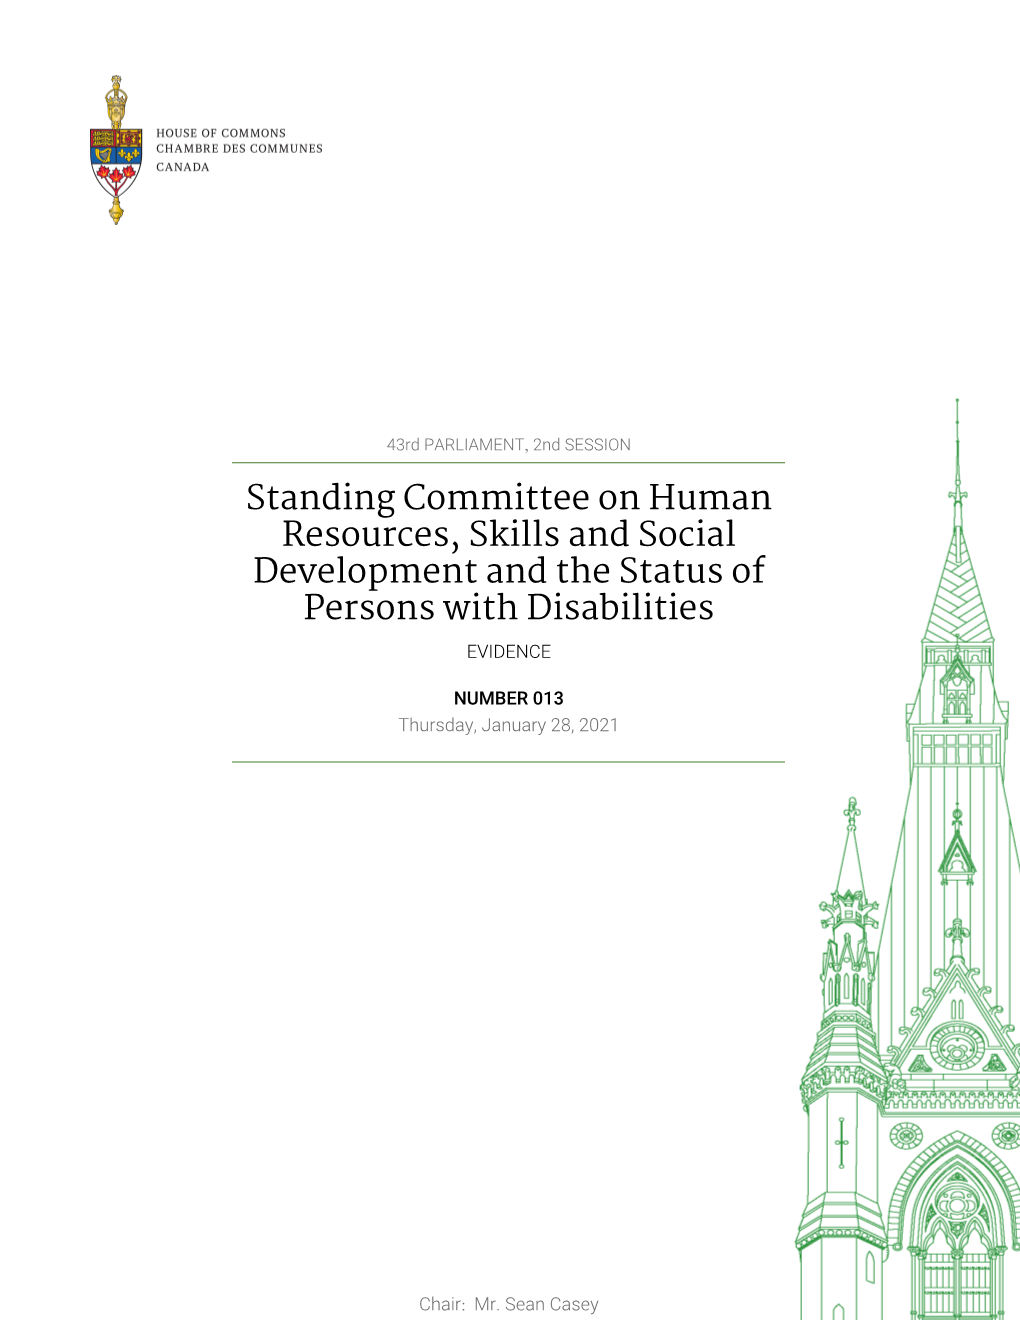 Evidence of the Standing Committee on Human Resources, Skills